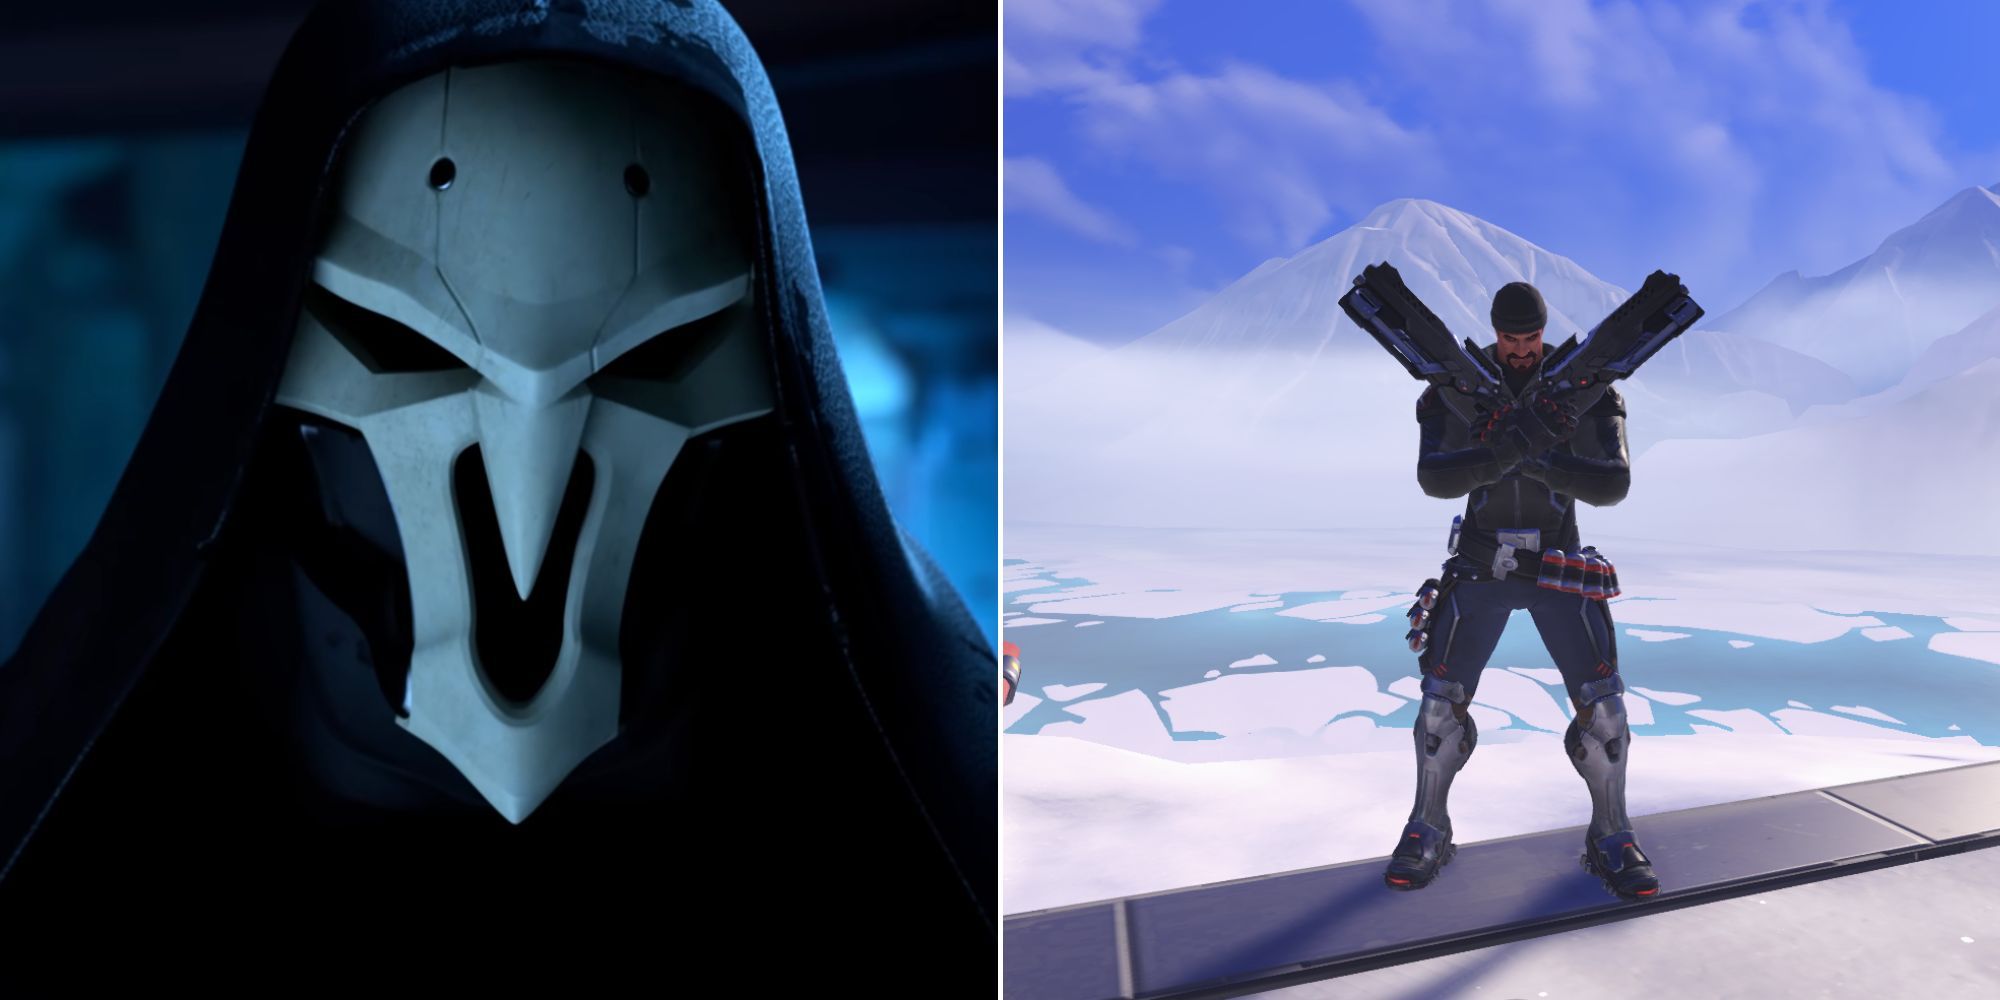 Overwatch 2 Reaper Closeup From Trailer And In Game Pose